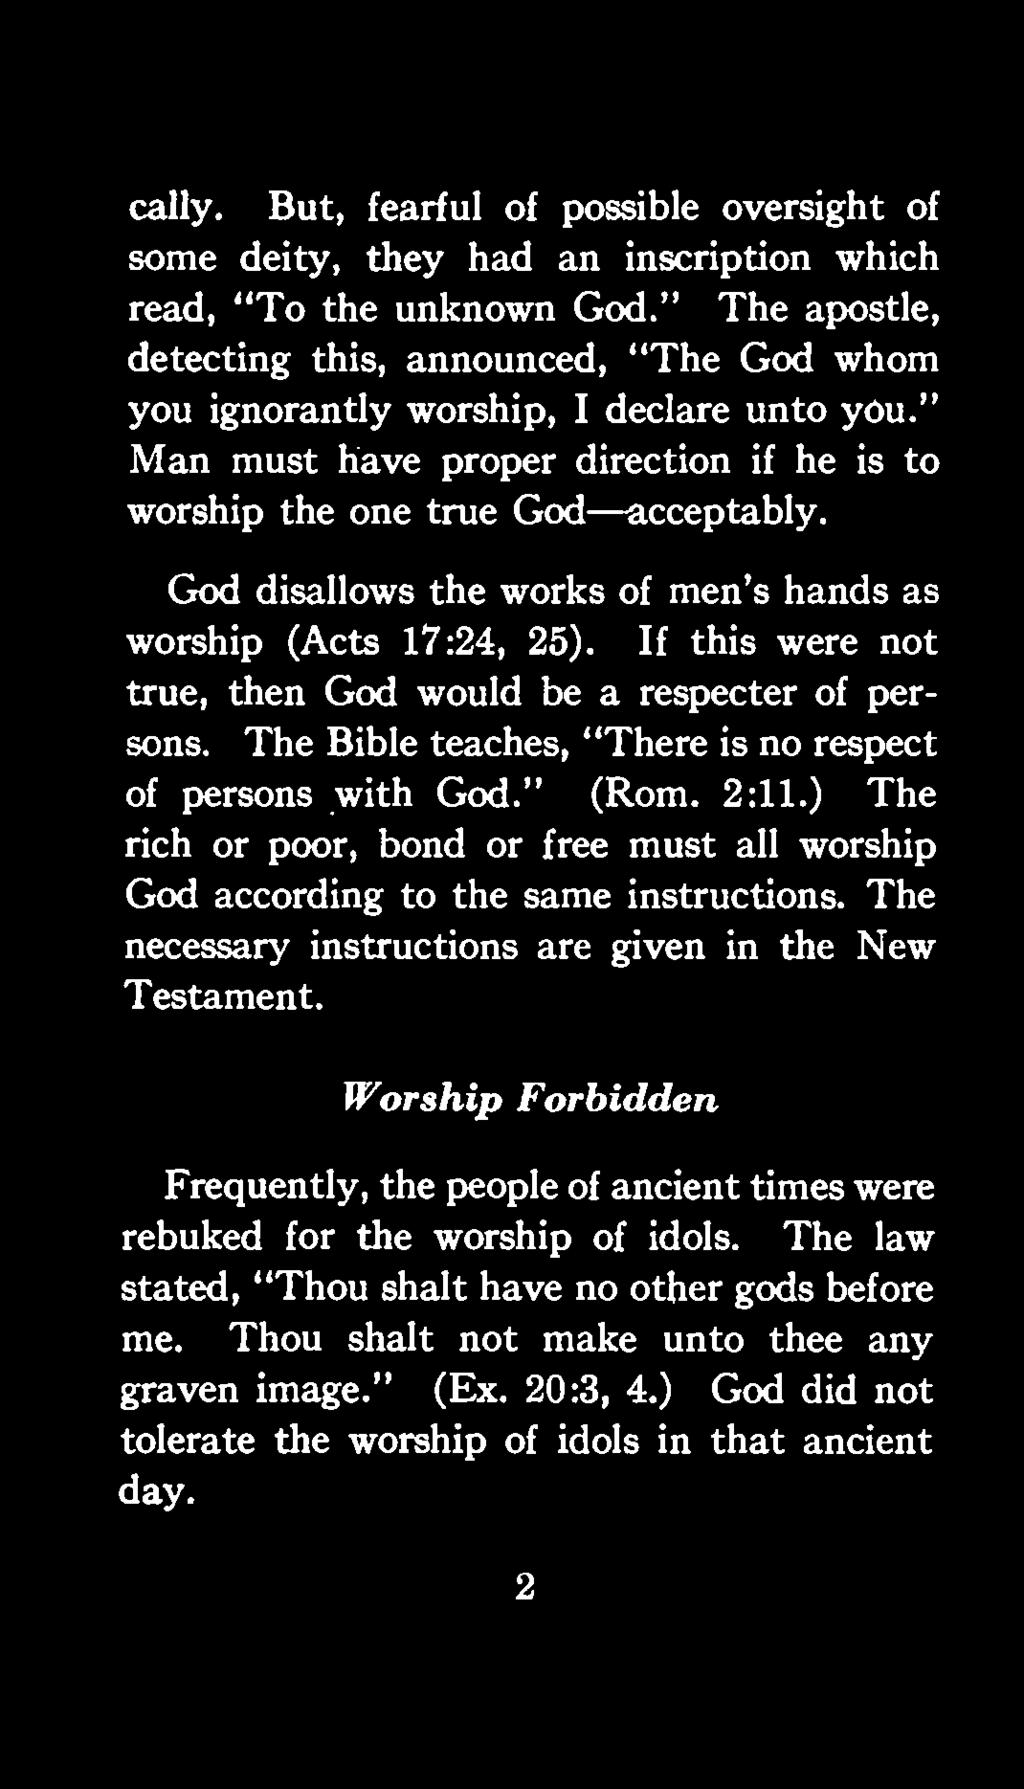 God disallows the works of men's hands as worship (Acts 17:24, 25). If this were not true, then God would be a resp ecter of persons. The Bible teaches, "There is no respect of persons with God.